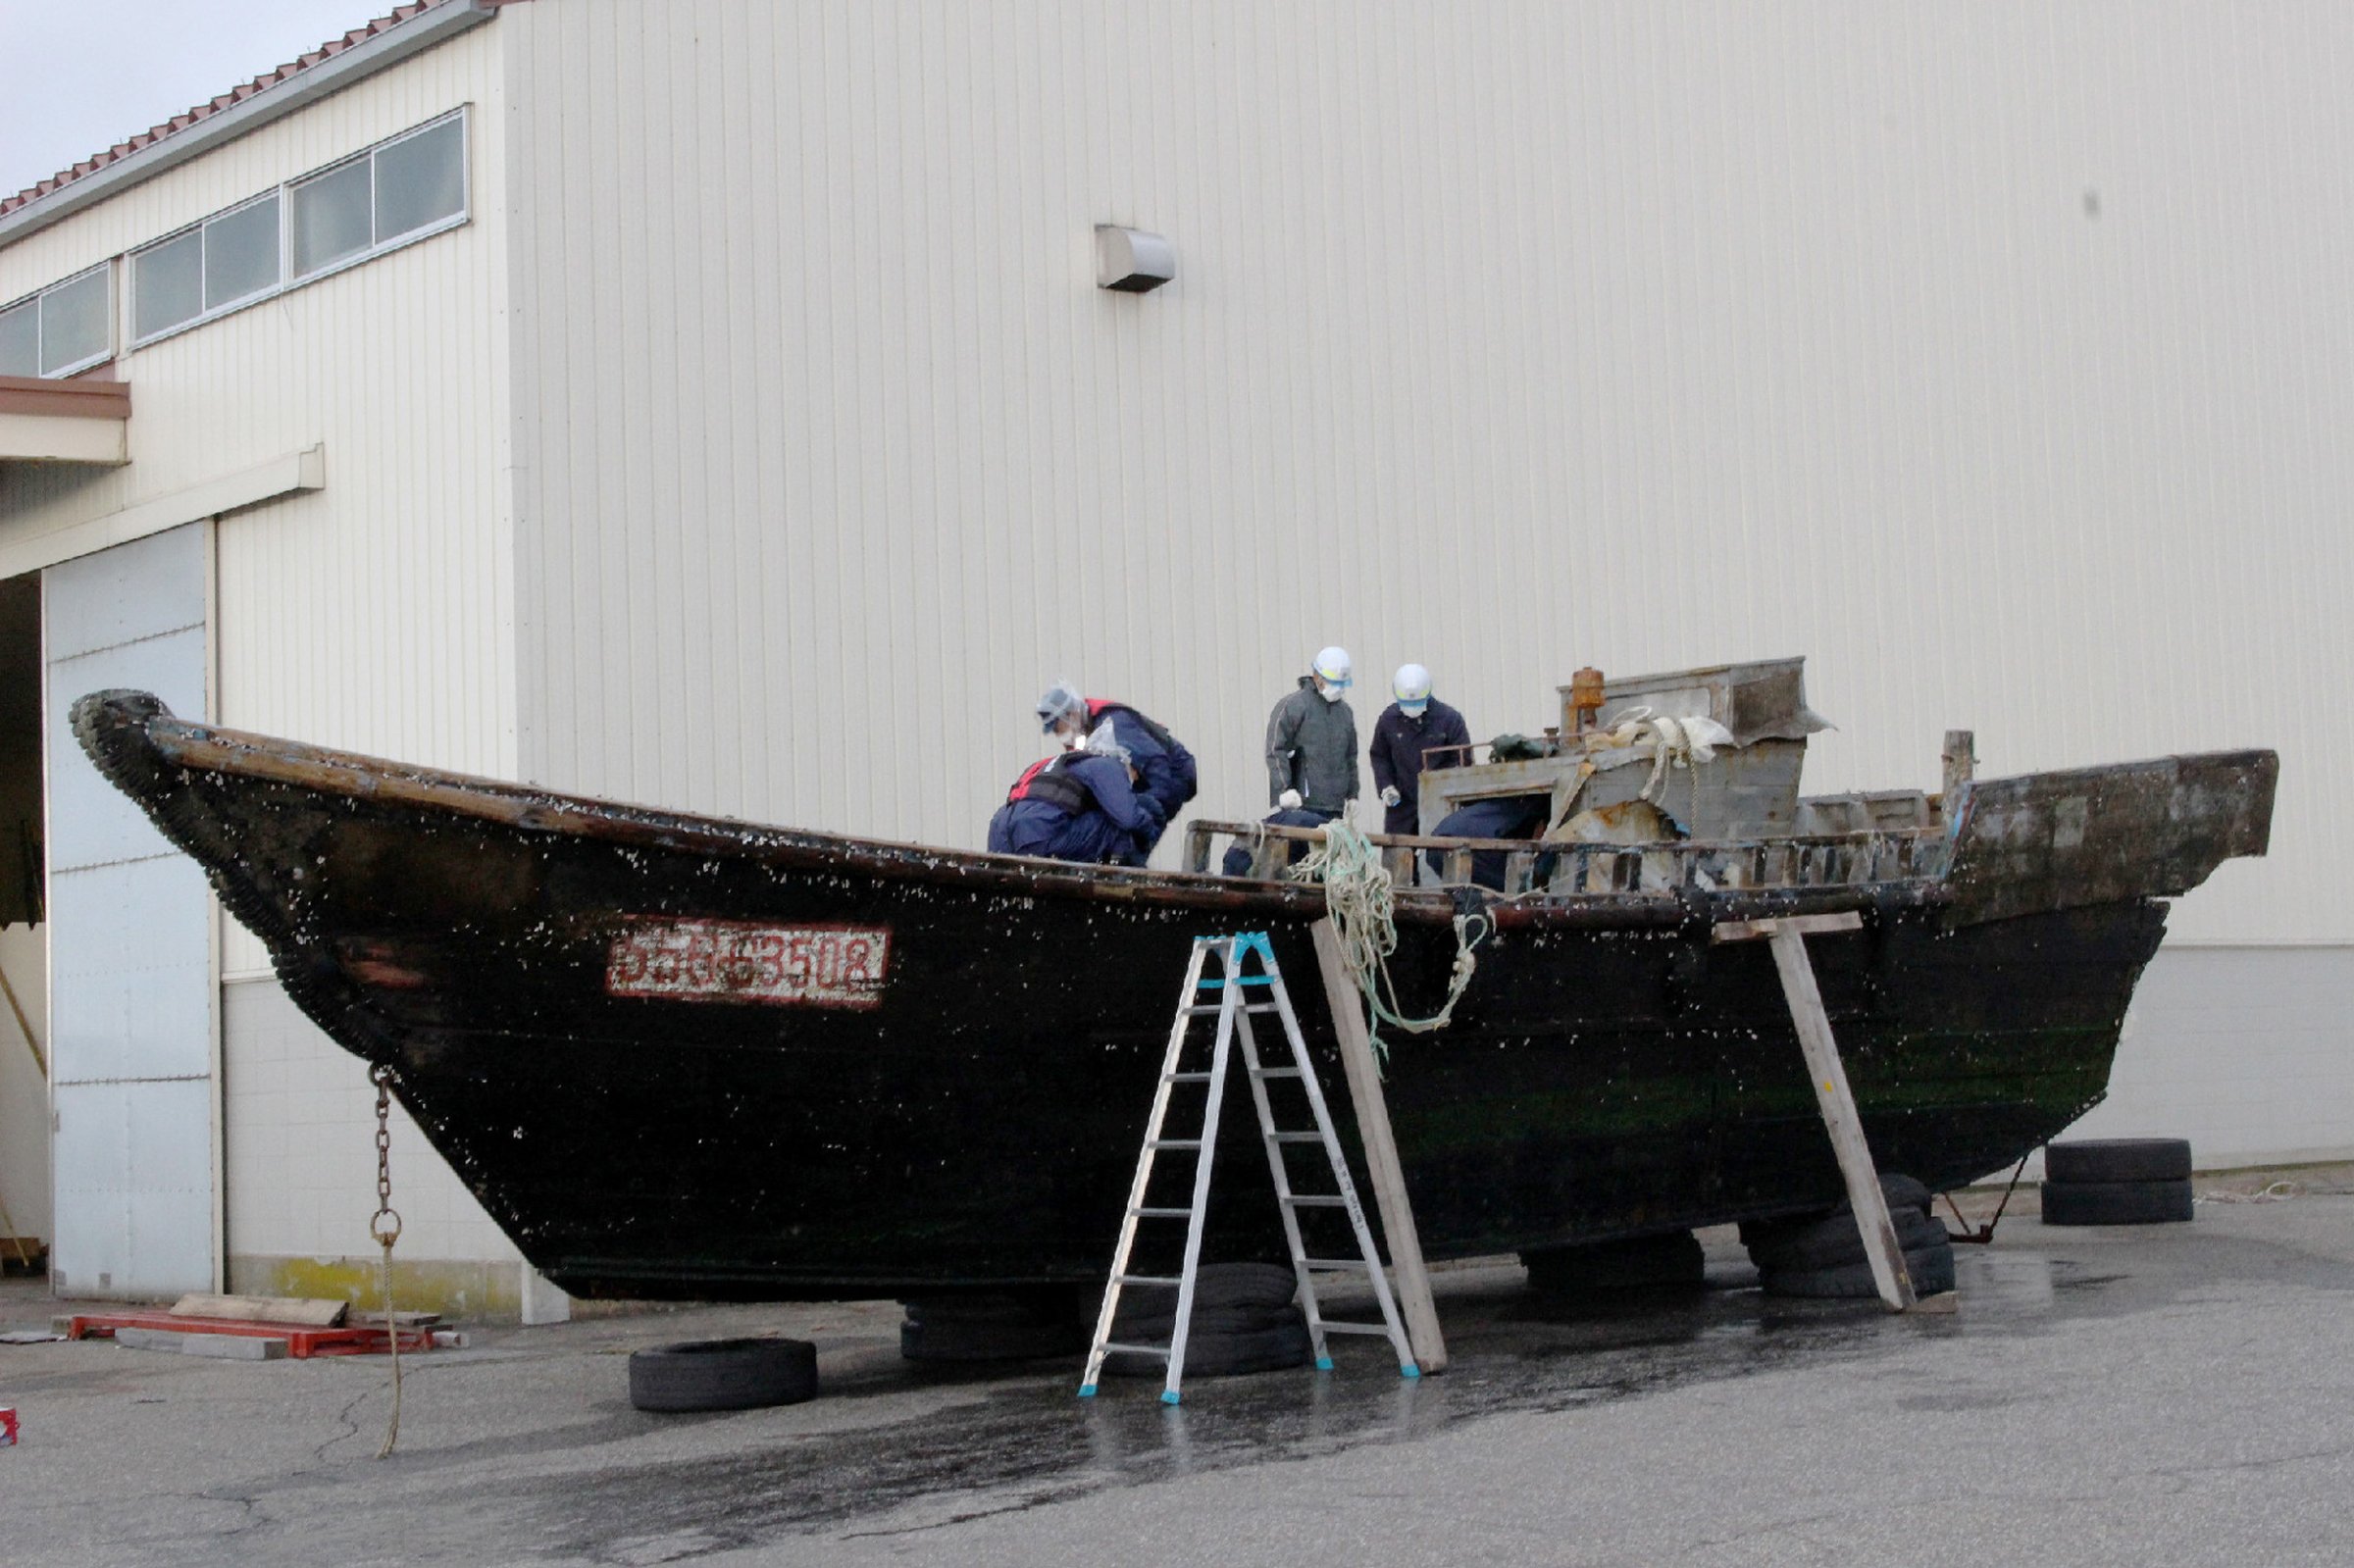 This picture taken on November 24, 2015 shows coast guard officials investigating a wooden boat at the Fukui port in Sakai city in Fukui prefecture, western Japan after the ship was found drifting off the coast of Fukui.